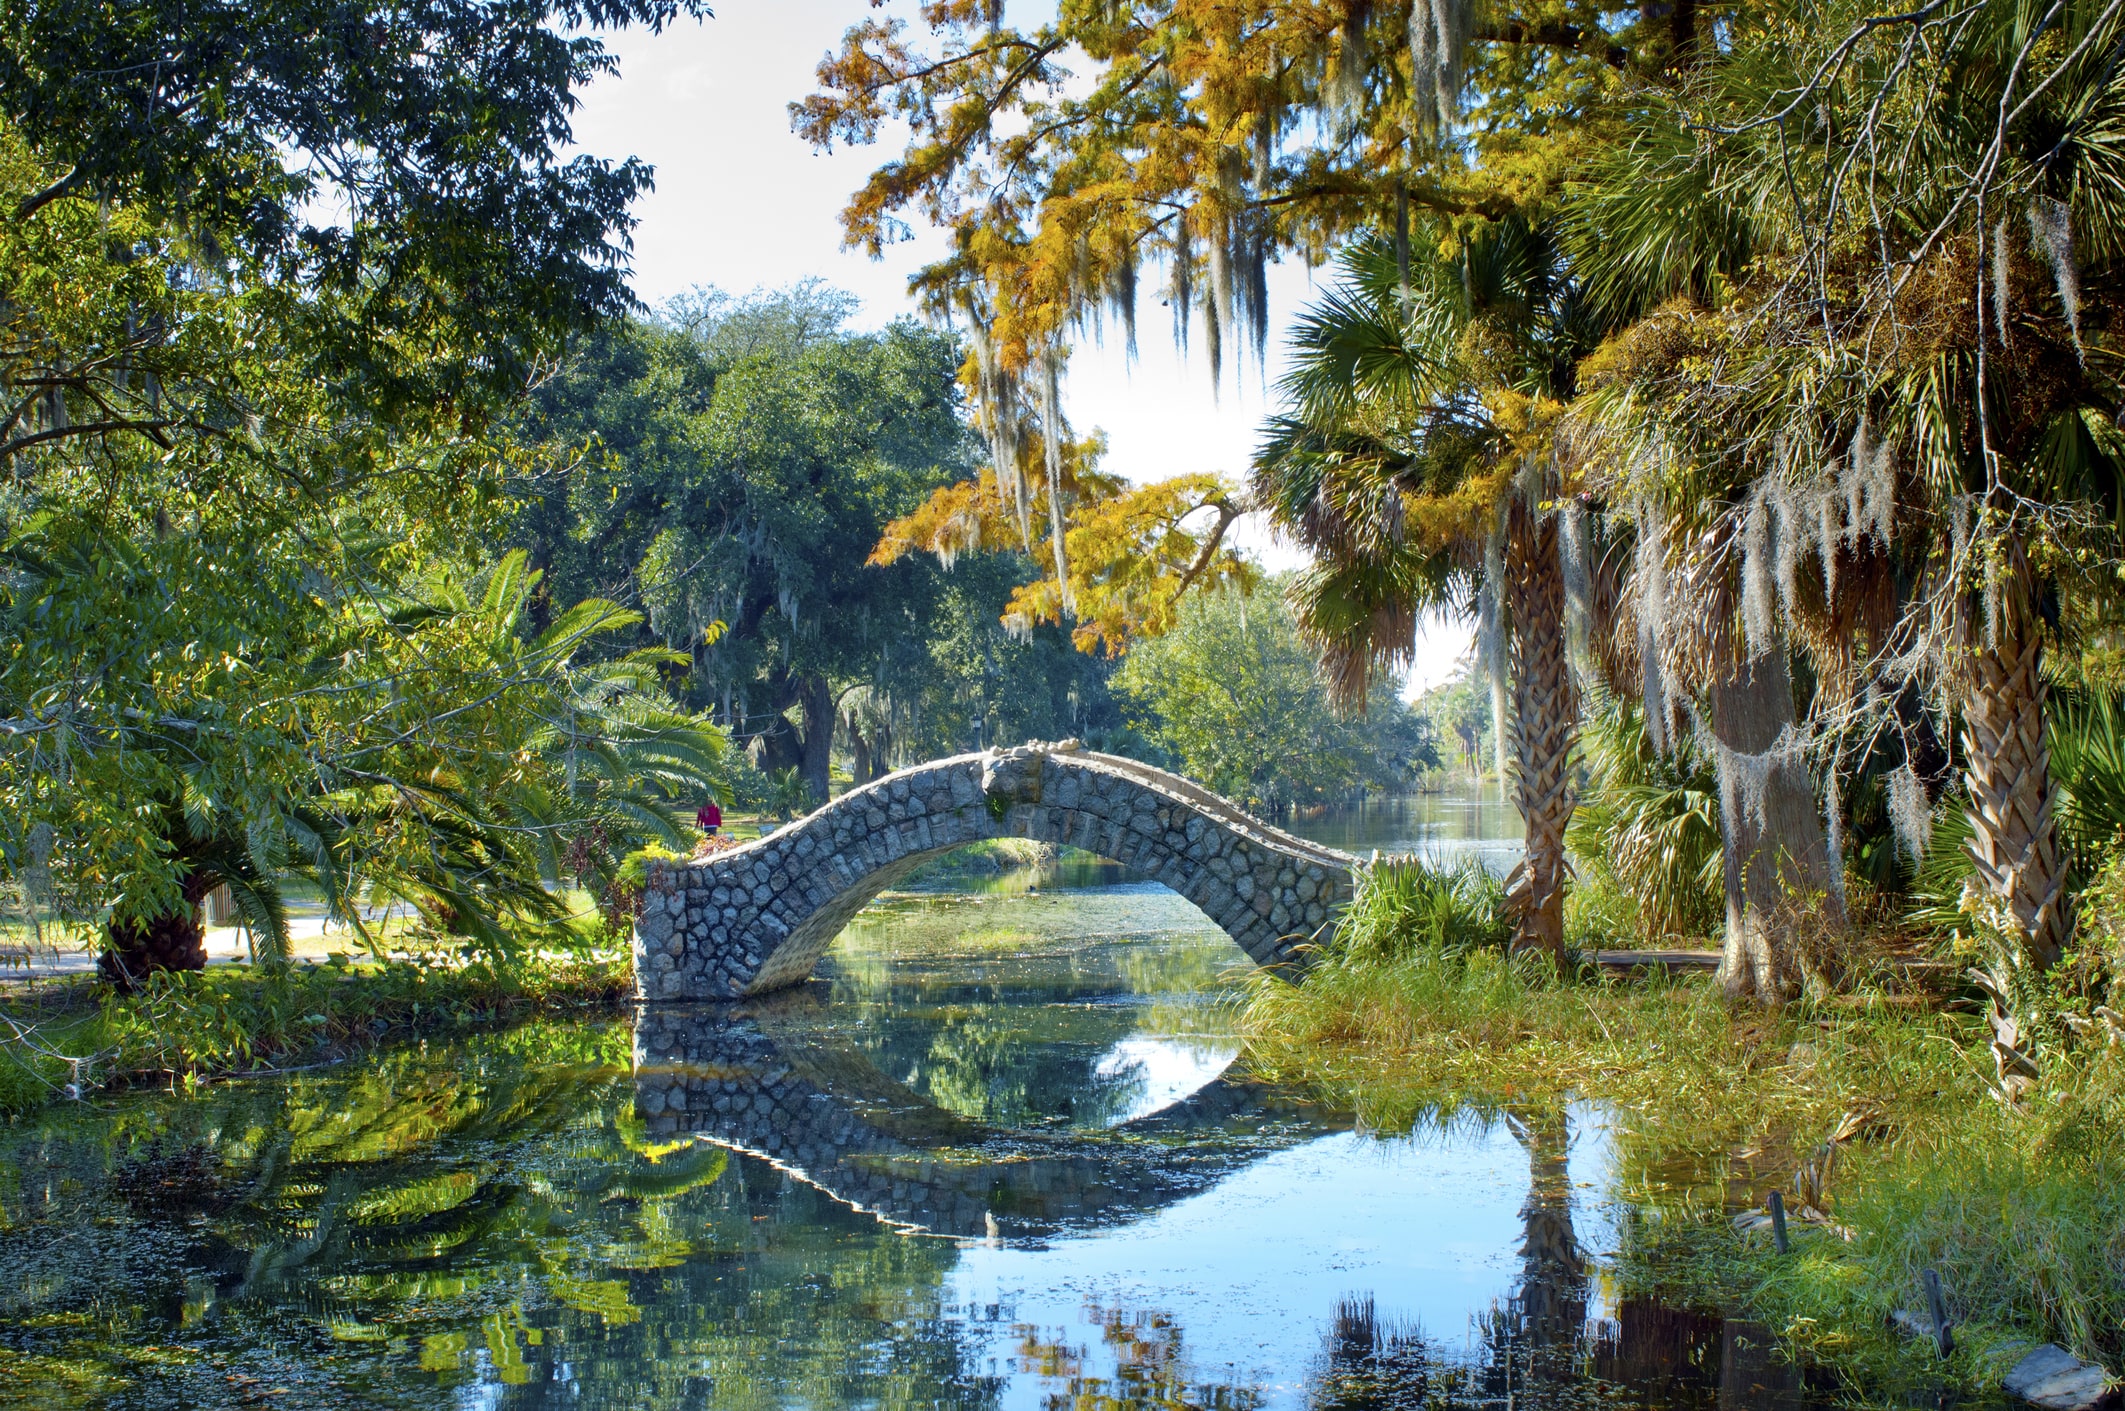 The Langles Bridge, built in 1902, is an old stone bridge that crosses a preserved bayou in City Park, one of the United States oldest urban parks in New Orleans. The park holds the world's largest collection of mature live oaks.